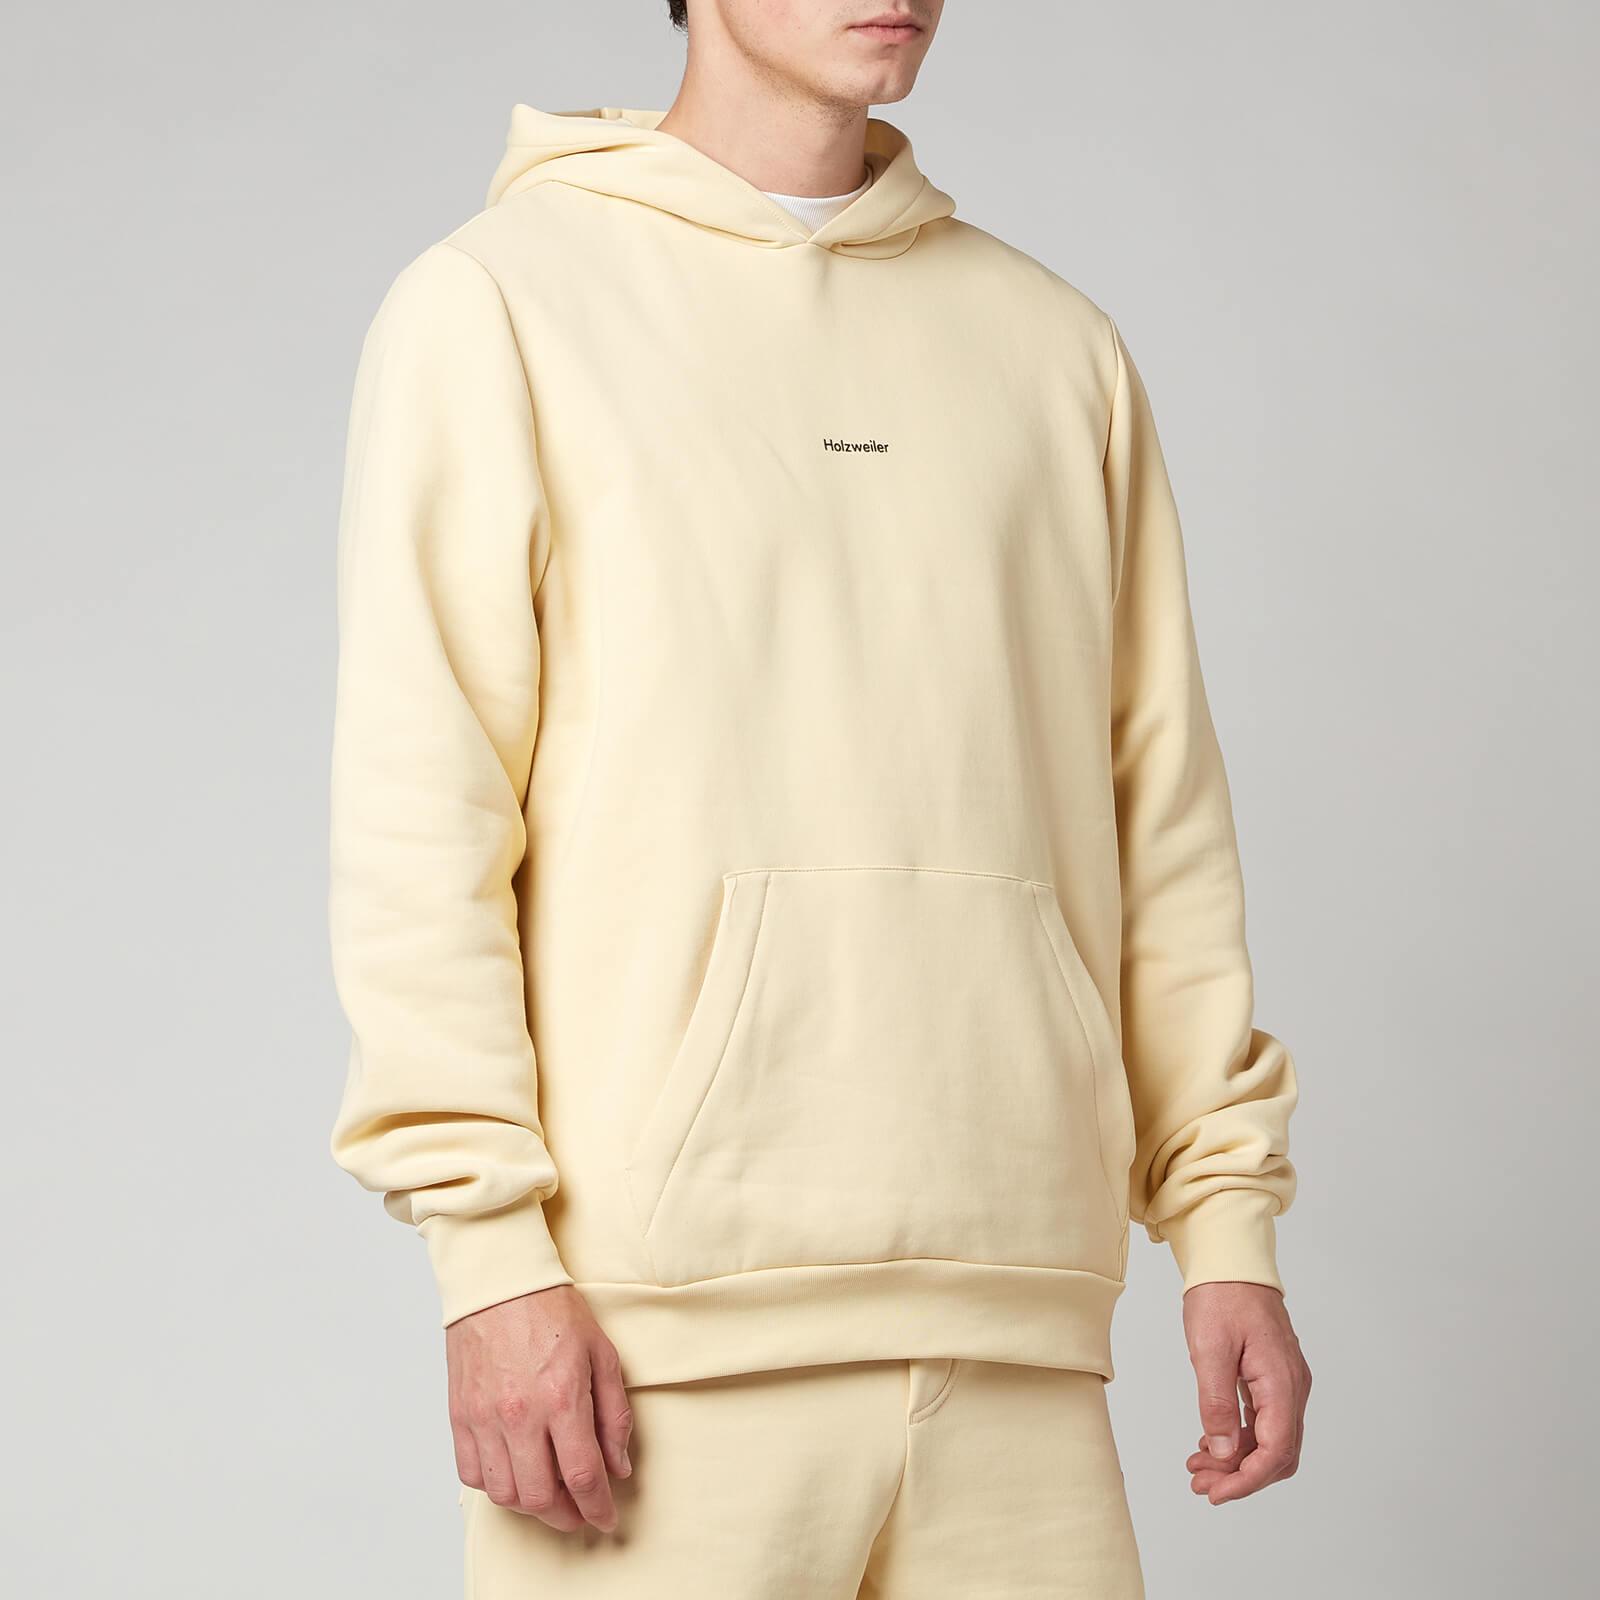 Holzweiler Synthetic Fleek Pullover Hoodie in Yellow for Men - Lyst